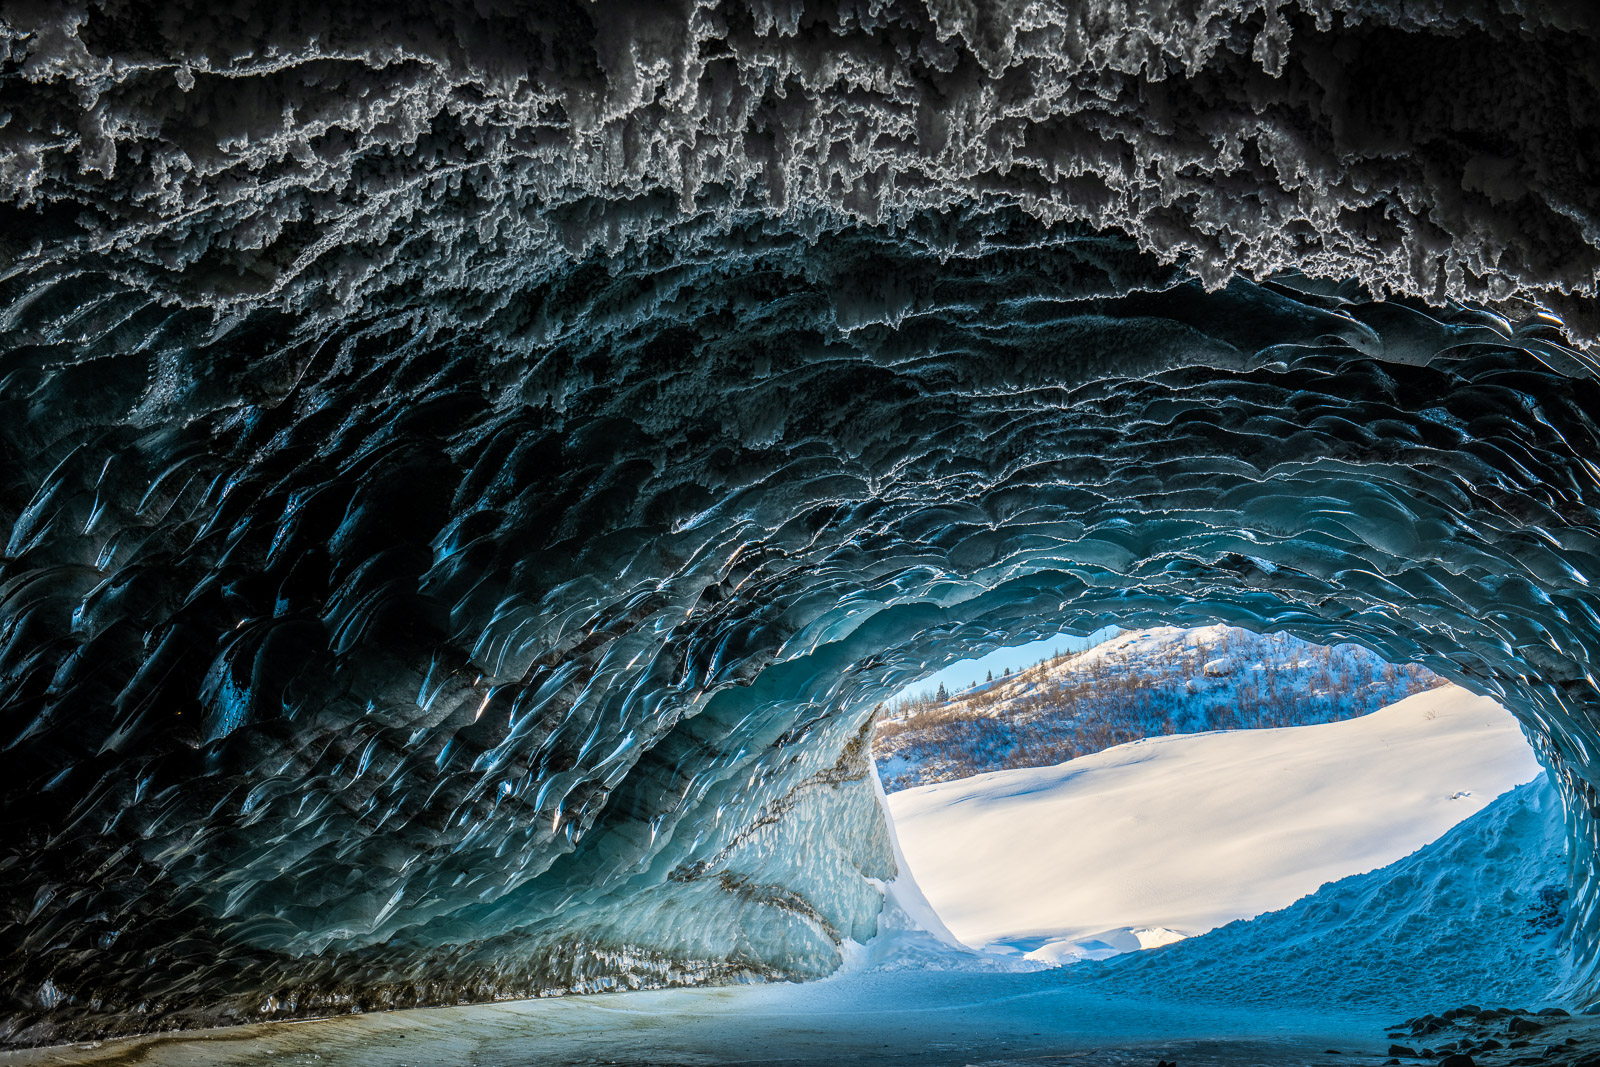 Layers of the outside landscape and various textures of the ice cave at Castner Glacier, Alaska.